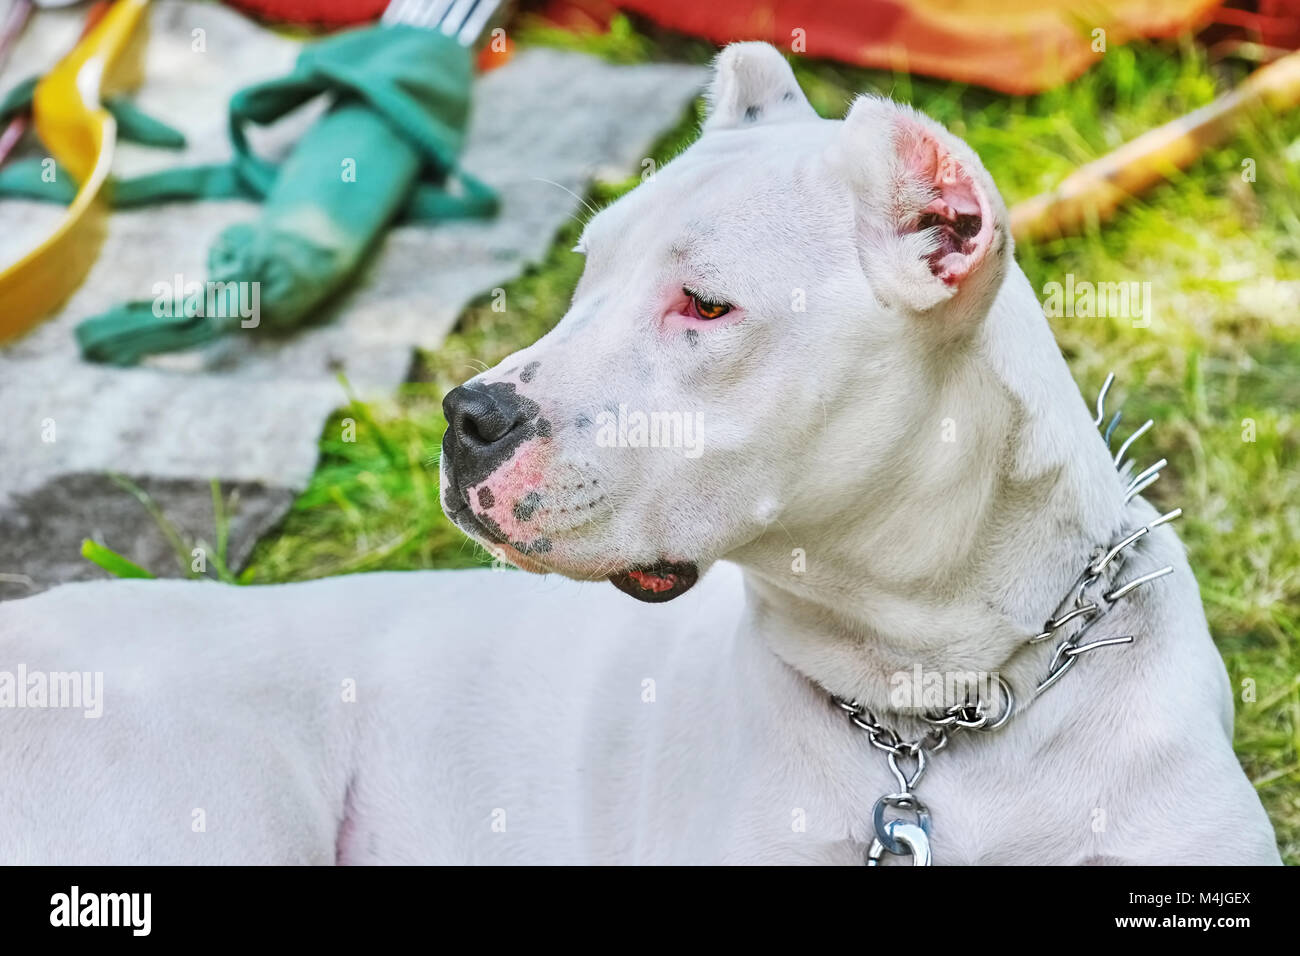 American Staffordshire Terrier Stock Photo